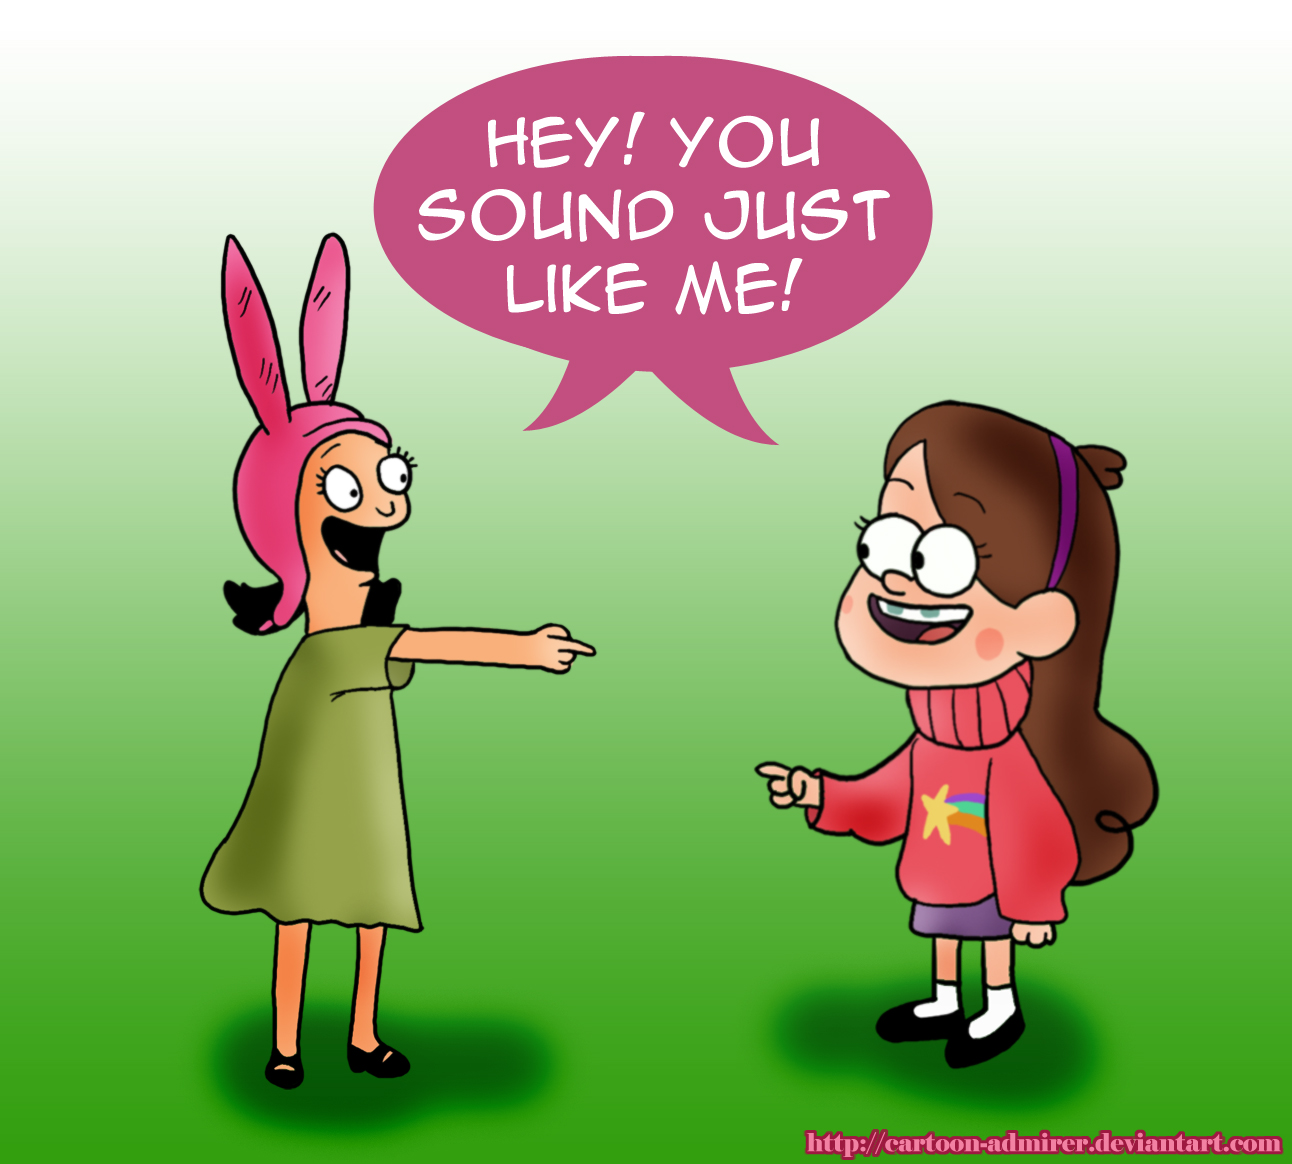 Louise and Mabel by Cartoon-Admirer on DeviantArt